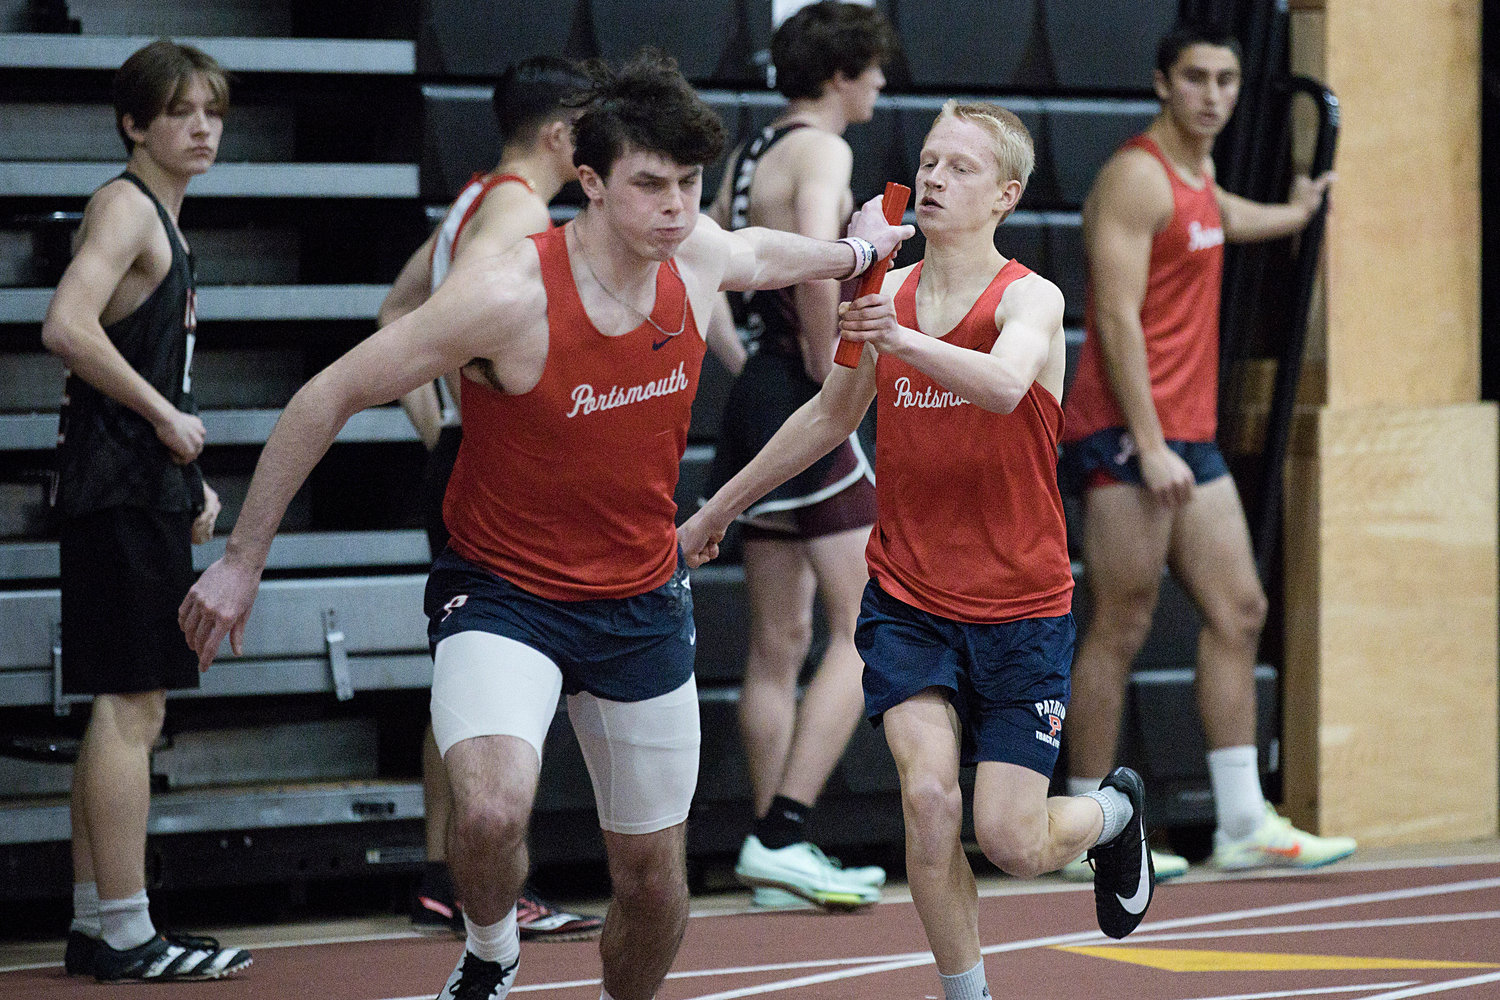 Nate DeConto hands the baton off to teammate Nick Spaner after running the first leg of the 4x200-meter relay, which the Patriots won in a season-best time of 1:37.52.